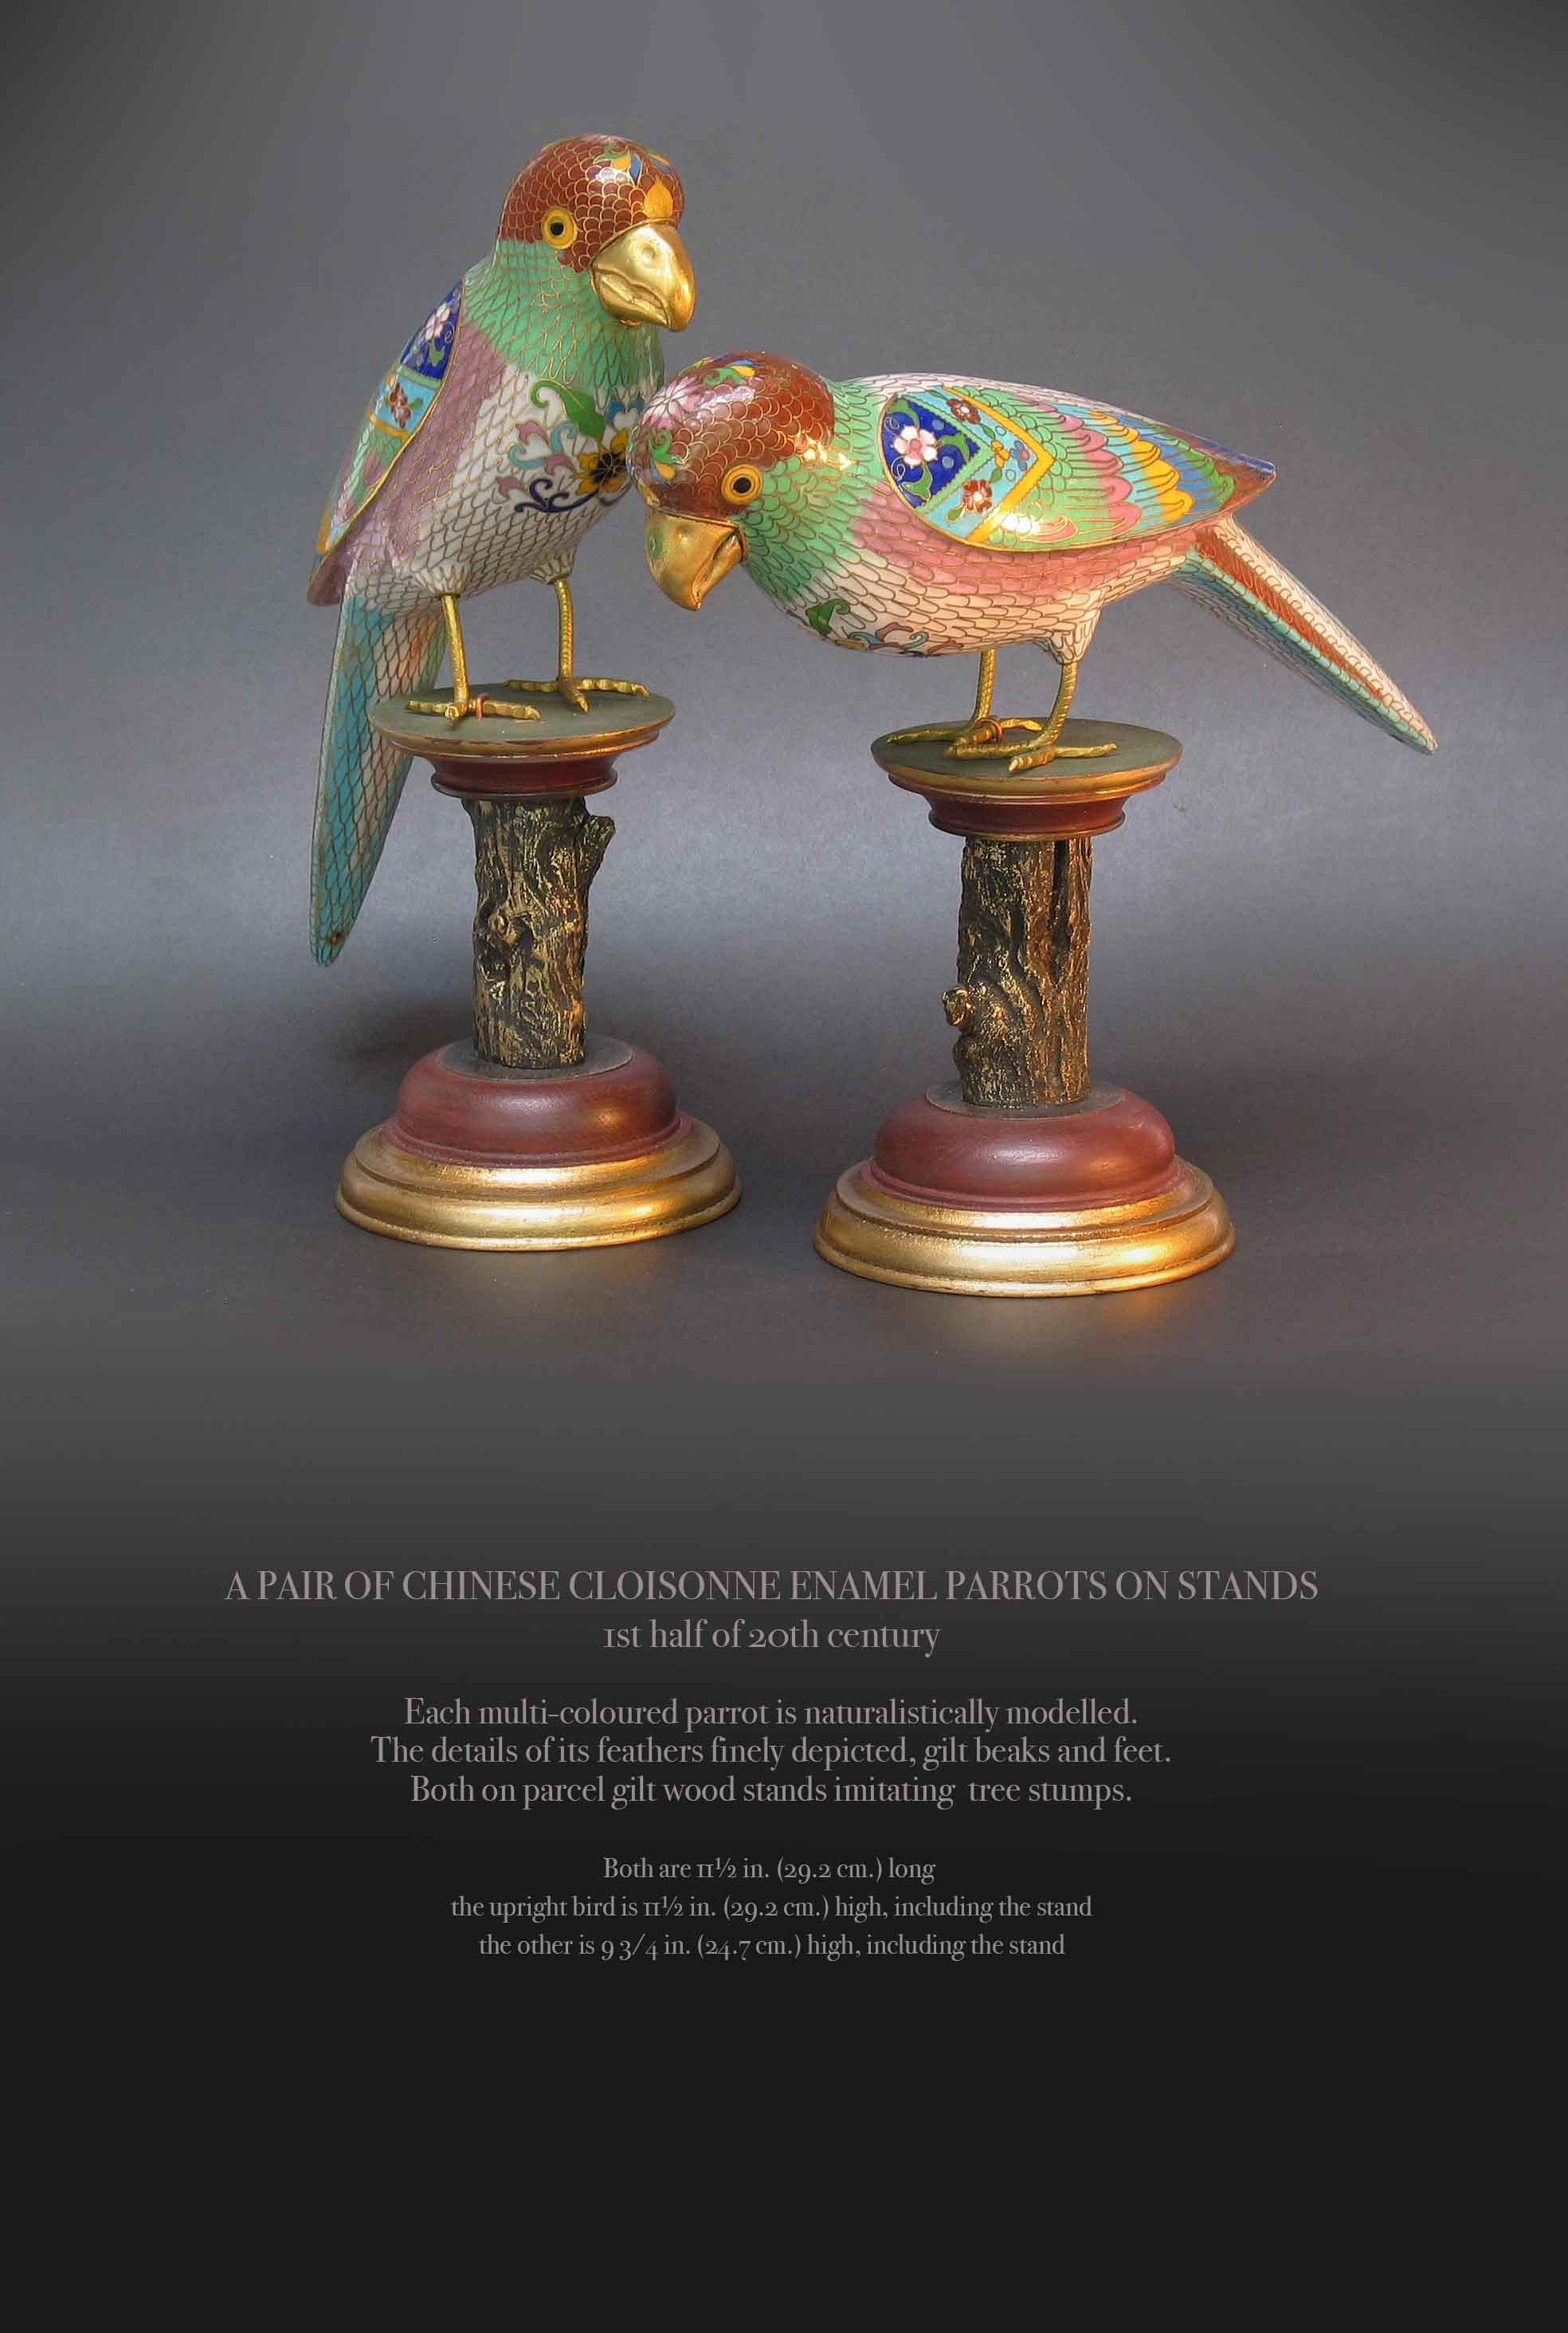 A PAIR OF CHINESE CLOISONNE ENAMEL PARROTS ON STANDS
1st half of 20th century

Each multi-coloured parrot is naturalistically modelled.
The details of its feathers finely depicted, gilt beaks and feet.
Both on parcel gilt wood stands imitating tree